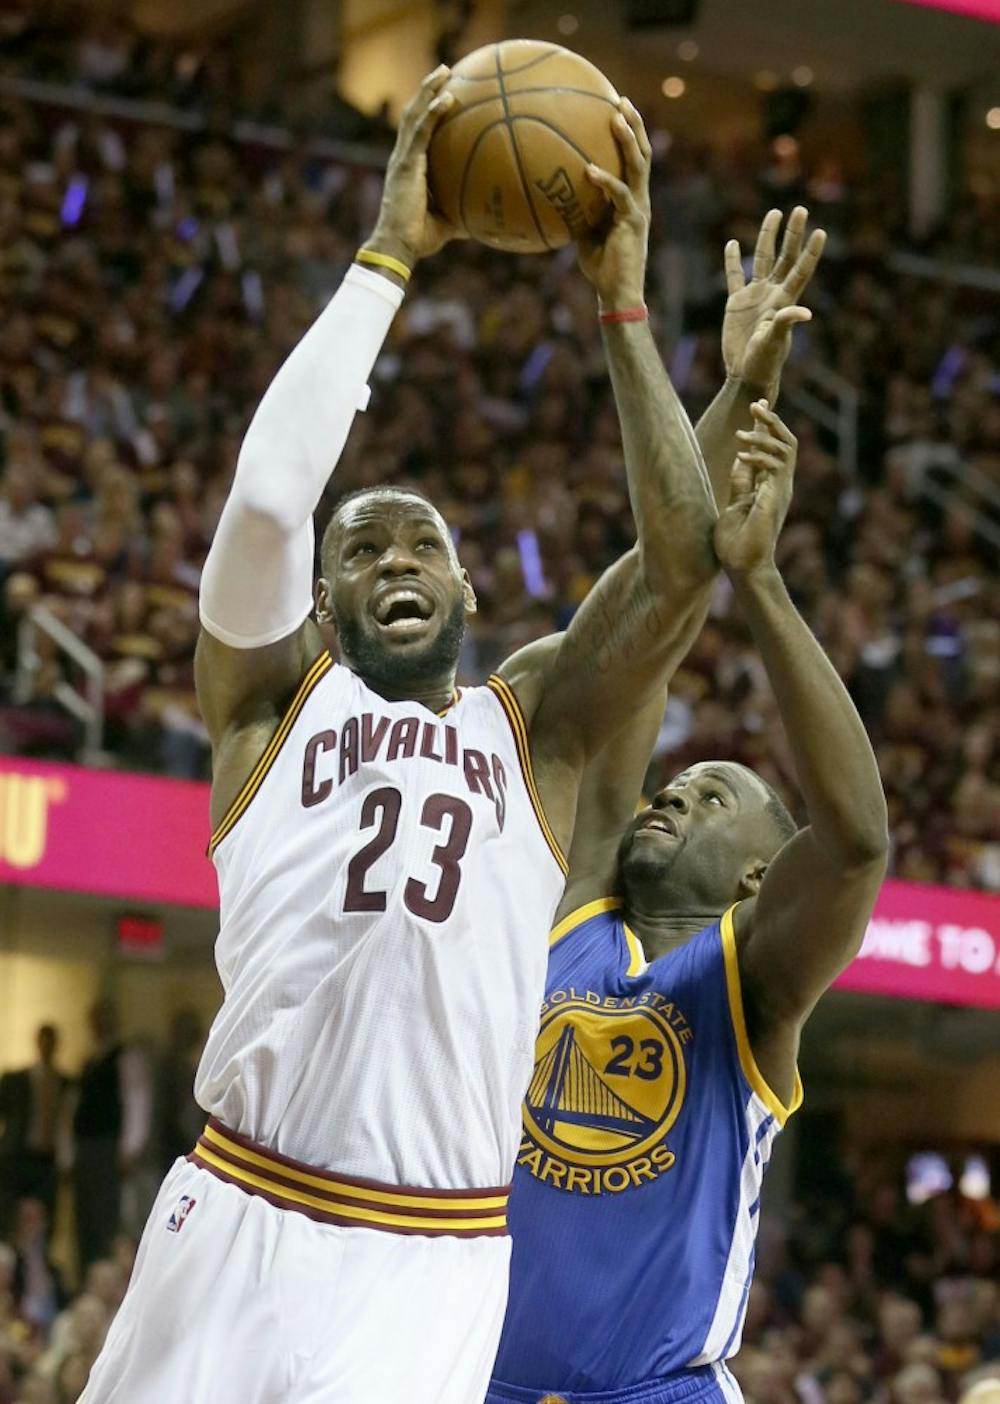 The Cleveland Cavaliers' LeBron James, left, drives to the basket as the Golden State Warriors' Draymond Green defends during the second quarter of Game 6 of the NBA Finals at Quicken Loans Arena in Cleveland on Tuesday, June 16, 2015. The Warriors won, 105-97, to clinch the championship. (Phil Masturzo/Akron Beacon Journal/TNS)